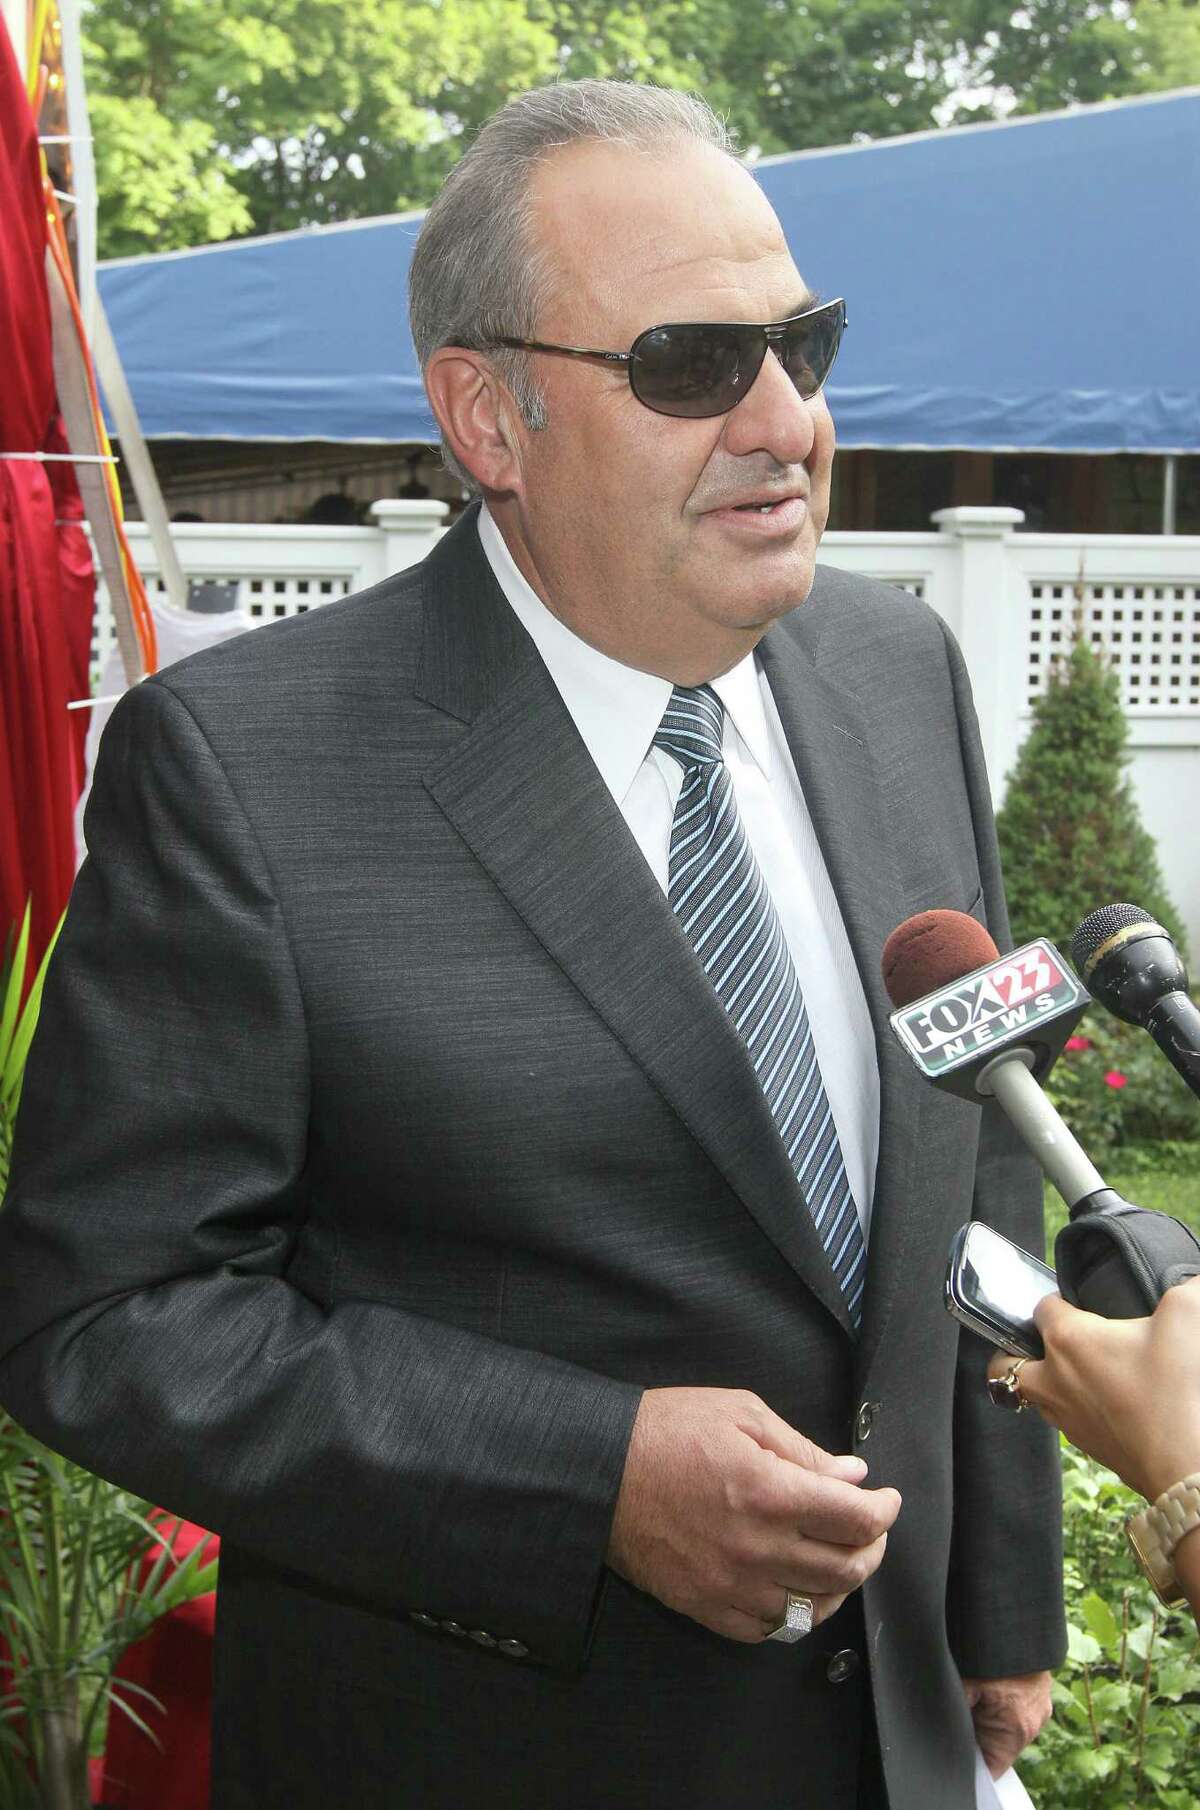 Saratoga Springs, NY - July 19, 2012 - (Photo by Joe Putrock/Special to the Times Union) - Billy Fuccillo never mentioned he was going to make a "huge" surprise donation of $50,000 while being interviewed on his way into the the 19th Annual Marini Builders Siro's Cup to benefit the Center for Disability Services.